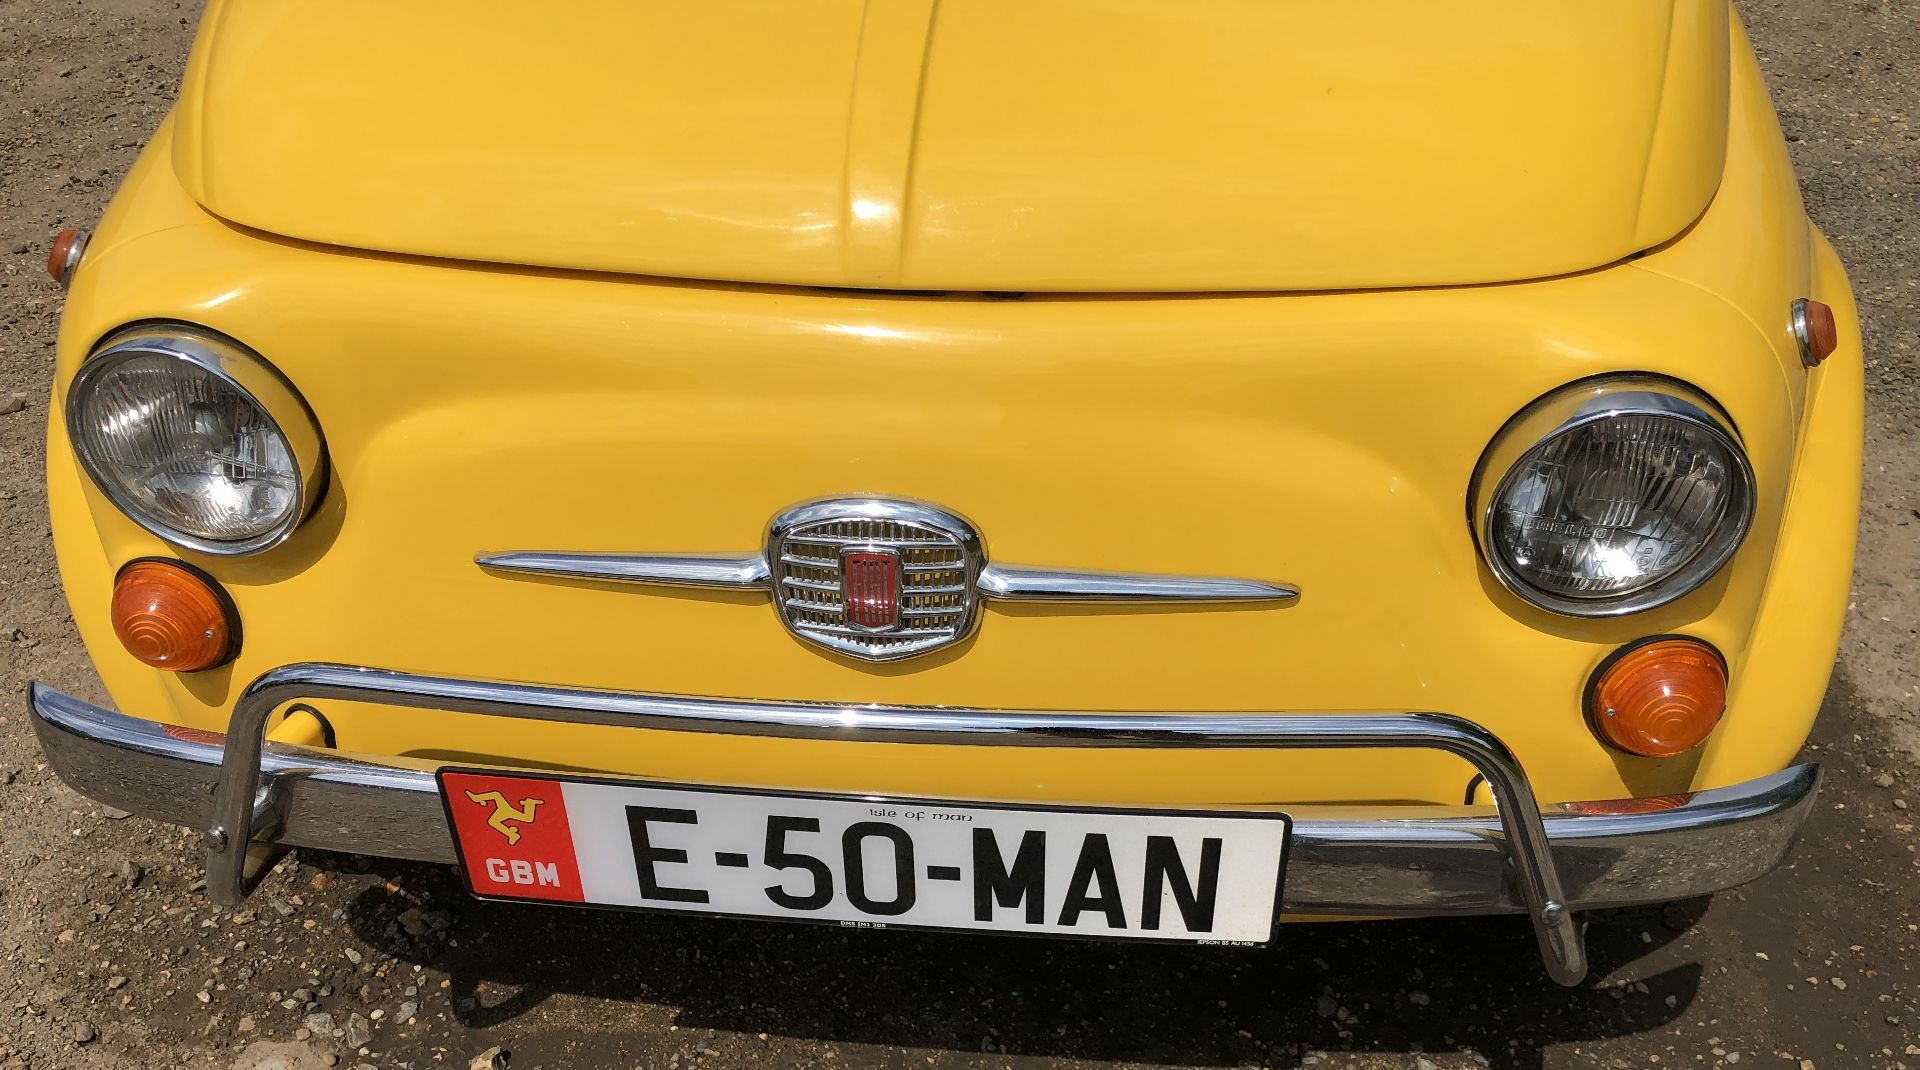 1972 Fiat 500 Saloon, Registration E-50-Man (IOM, Formally Registered as TGF 249L), First Registered - Image 10 of 34